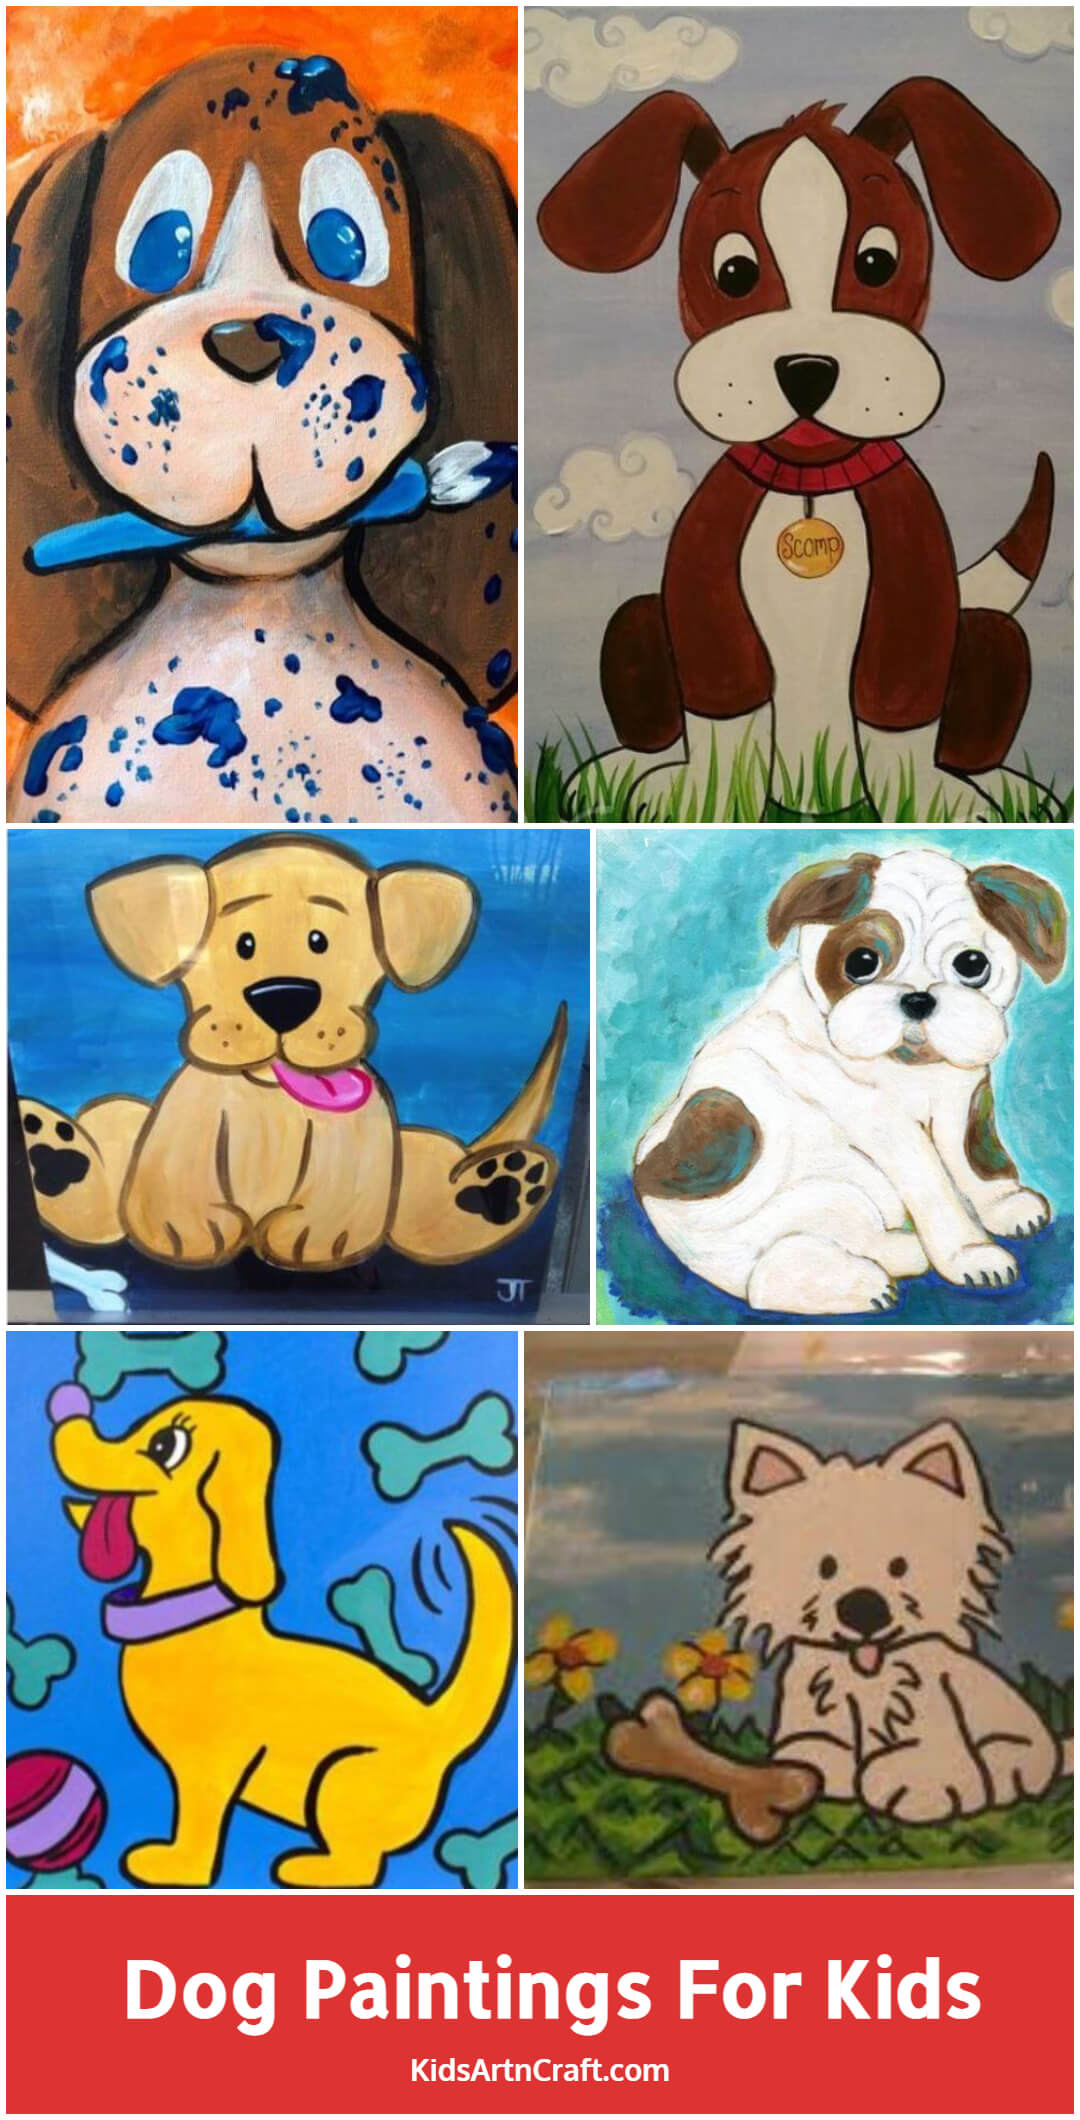  Dog Paintings For Kids